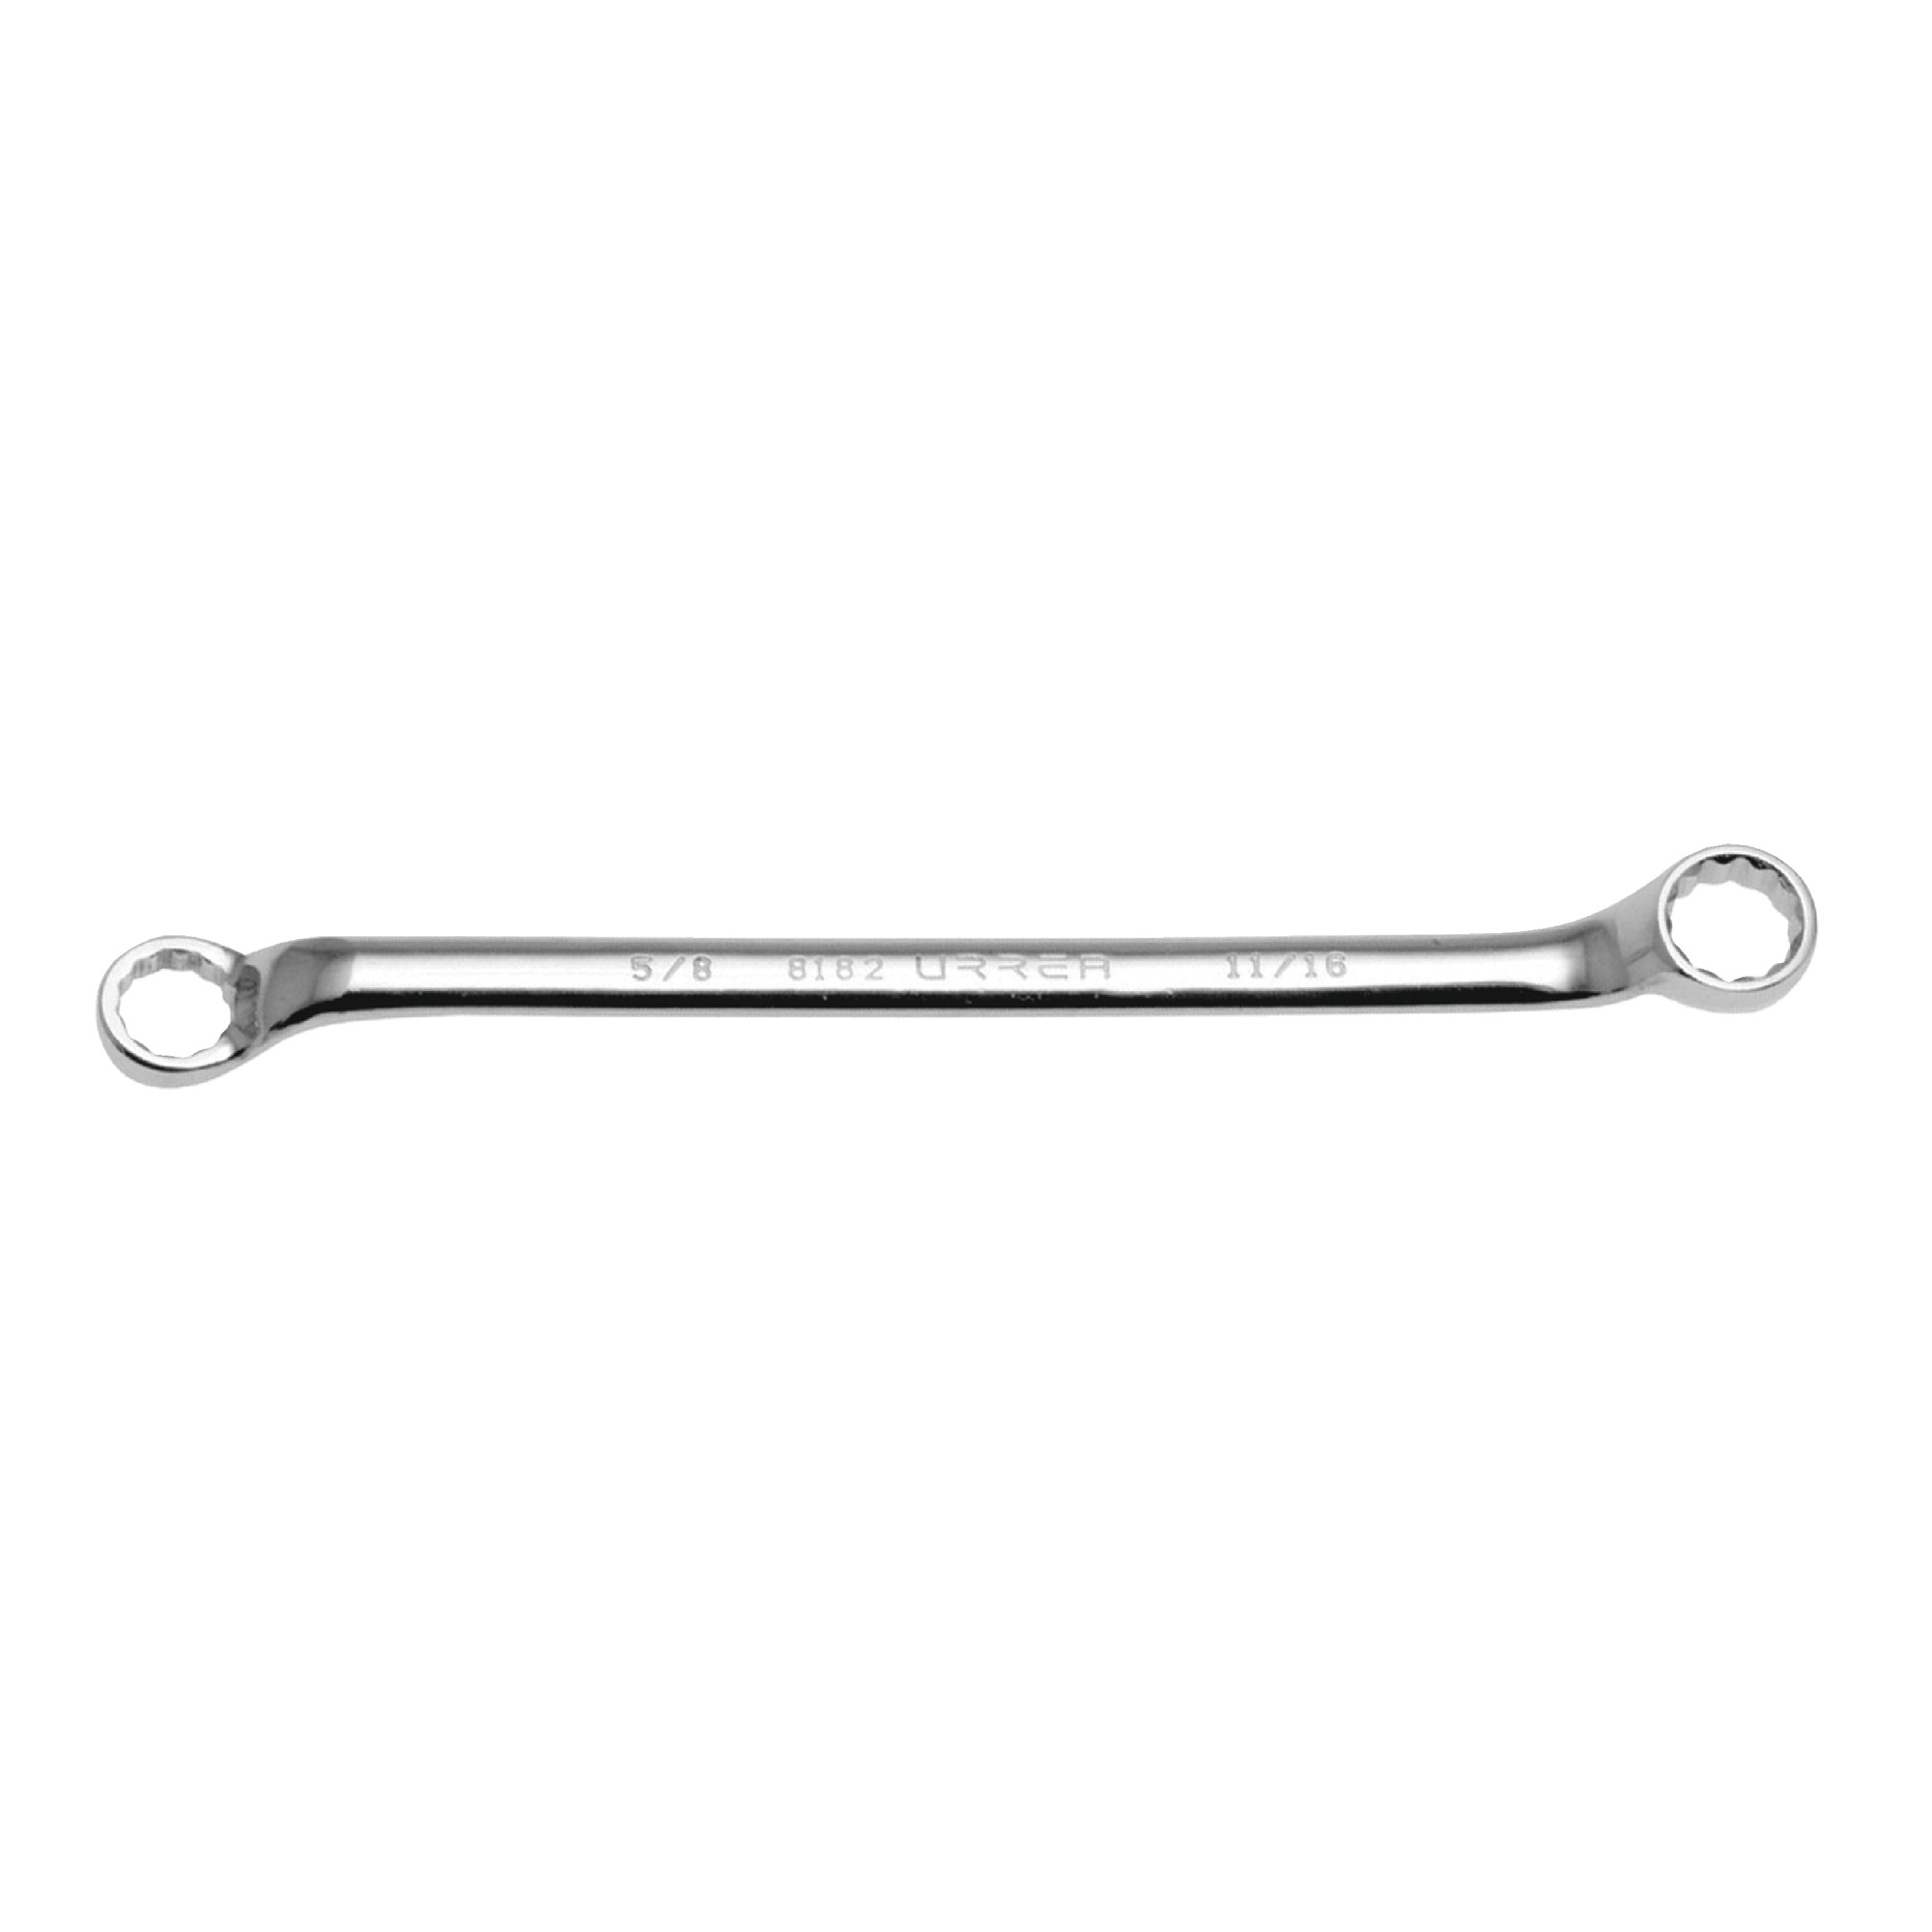 81415 14mm x 15mm Chrome Finish 12 Point Box End Wrench